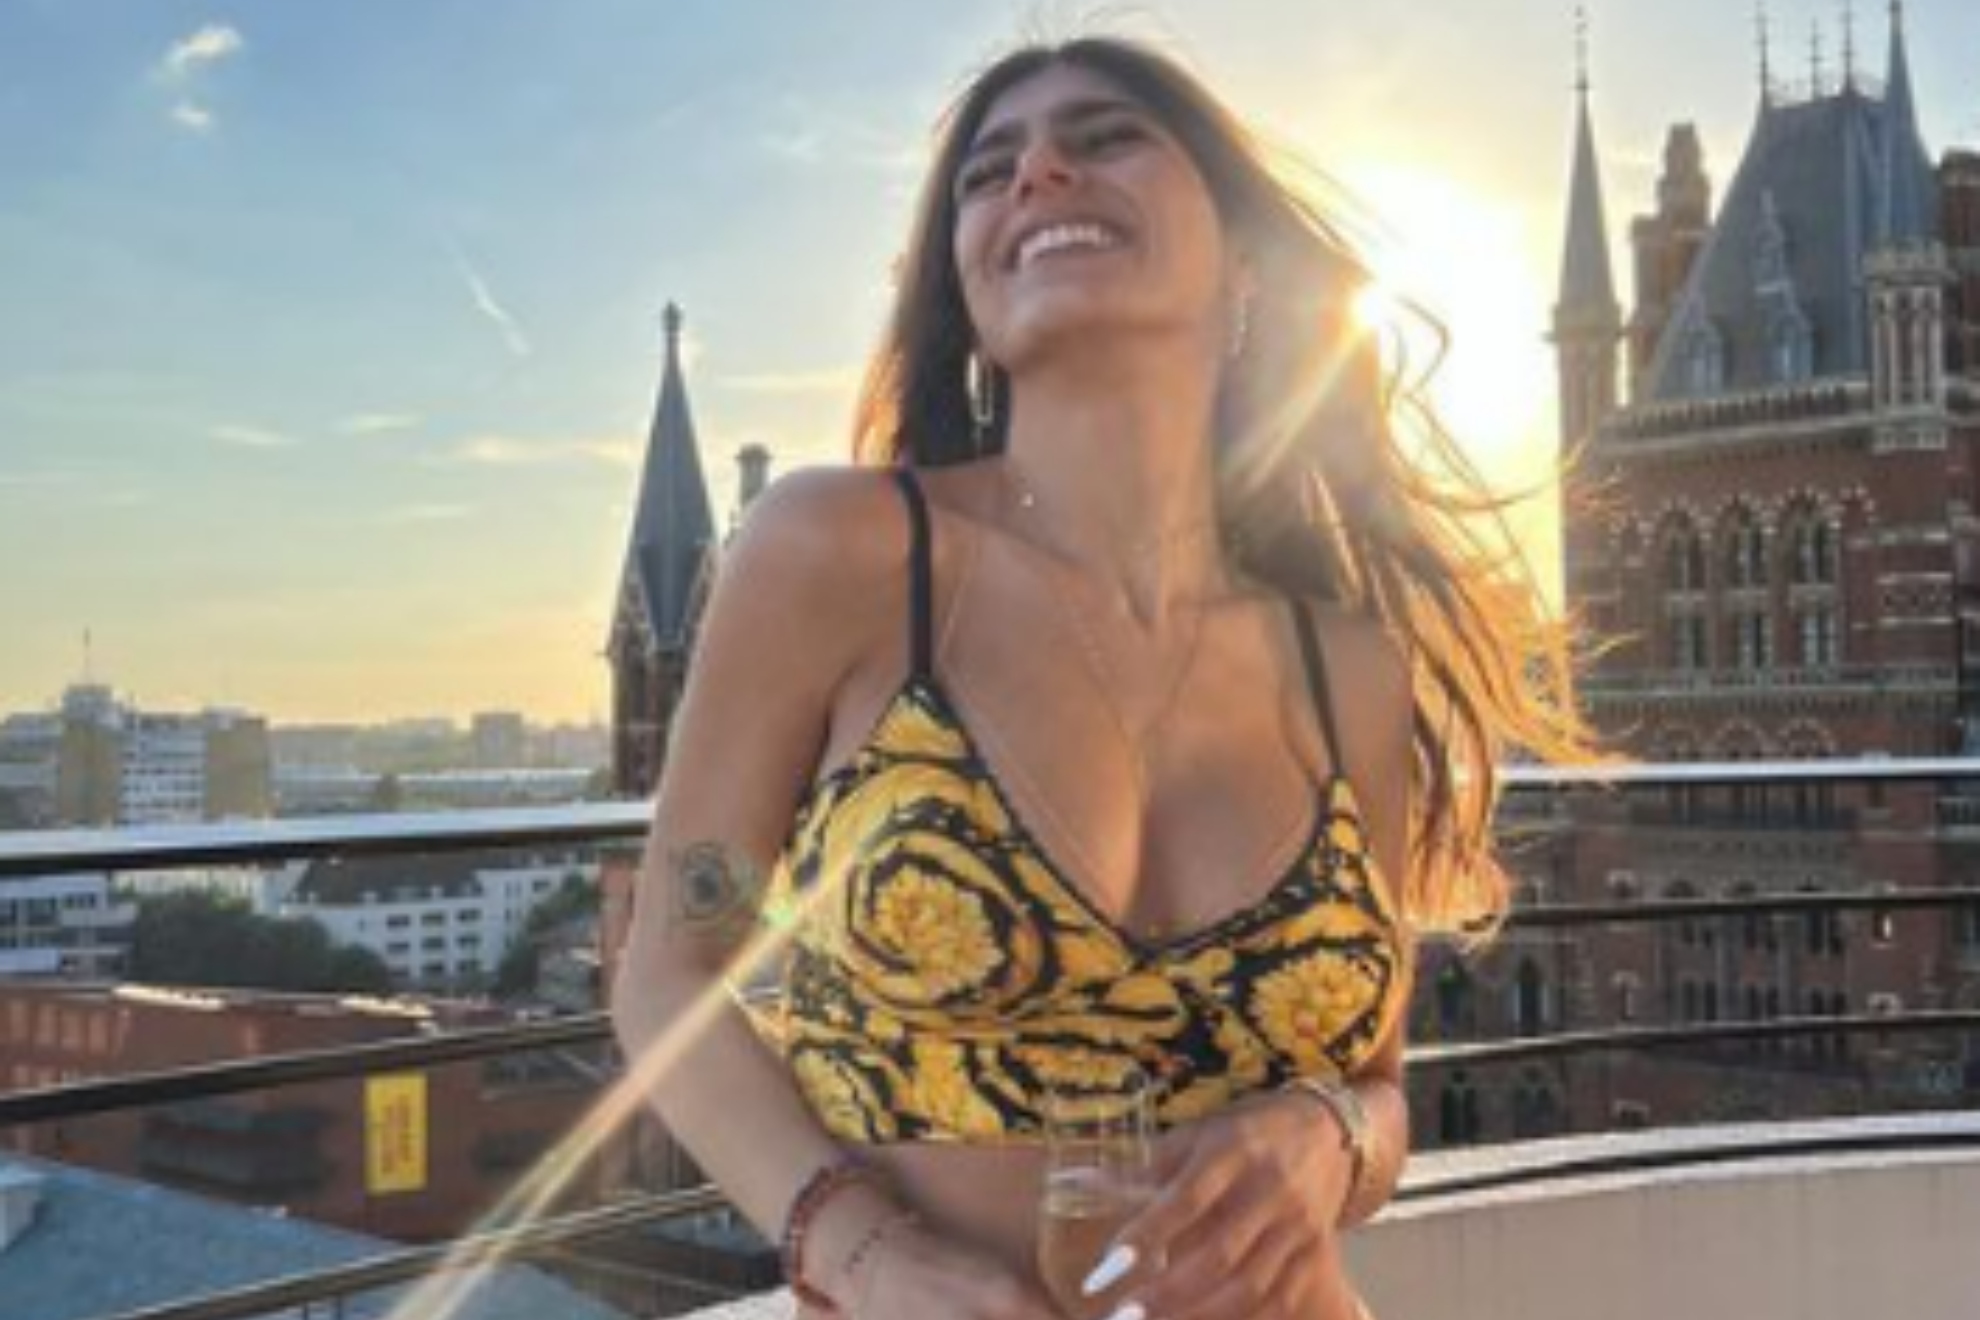 Mia Khalifa Latest Videos 2019 - How much did Mia Khalifa earn in her active years as a porn actress? | Marca